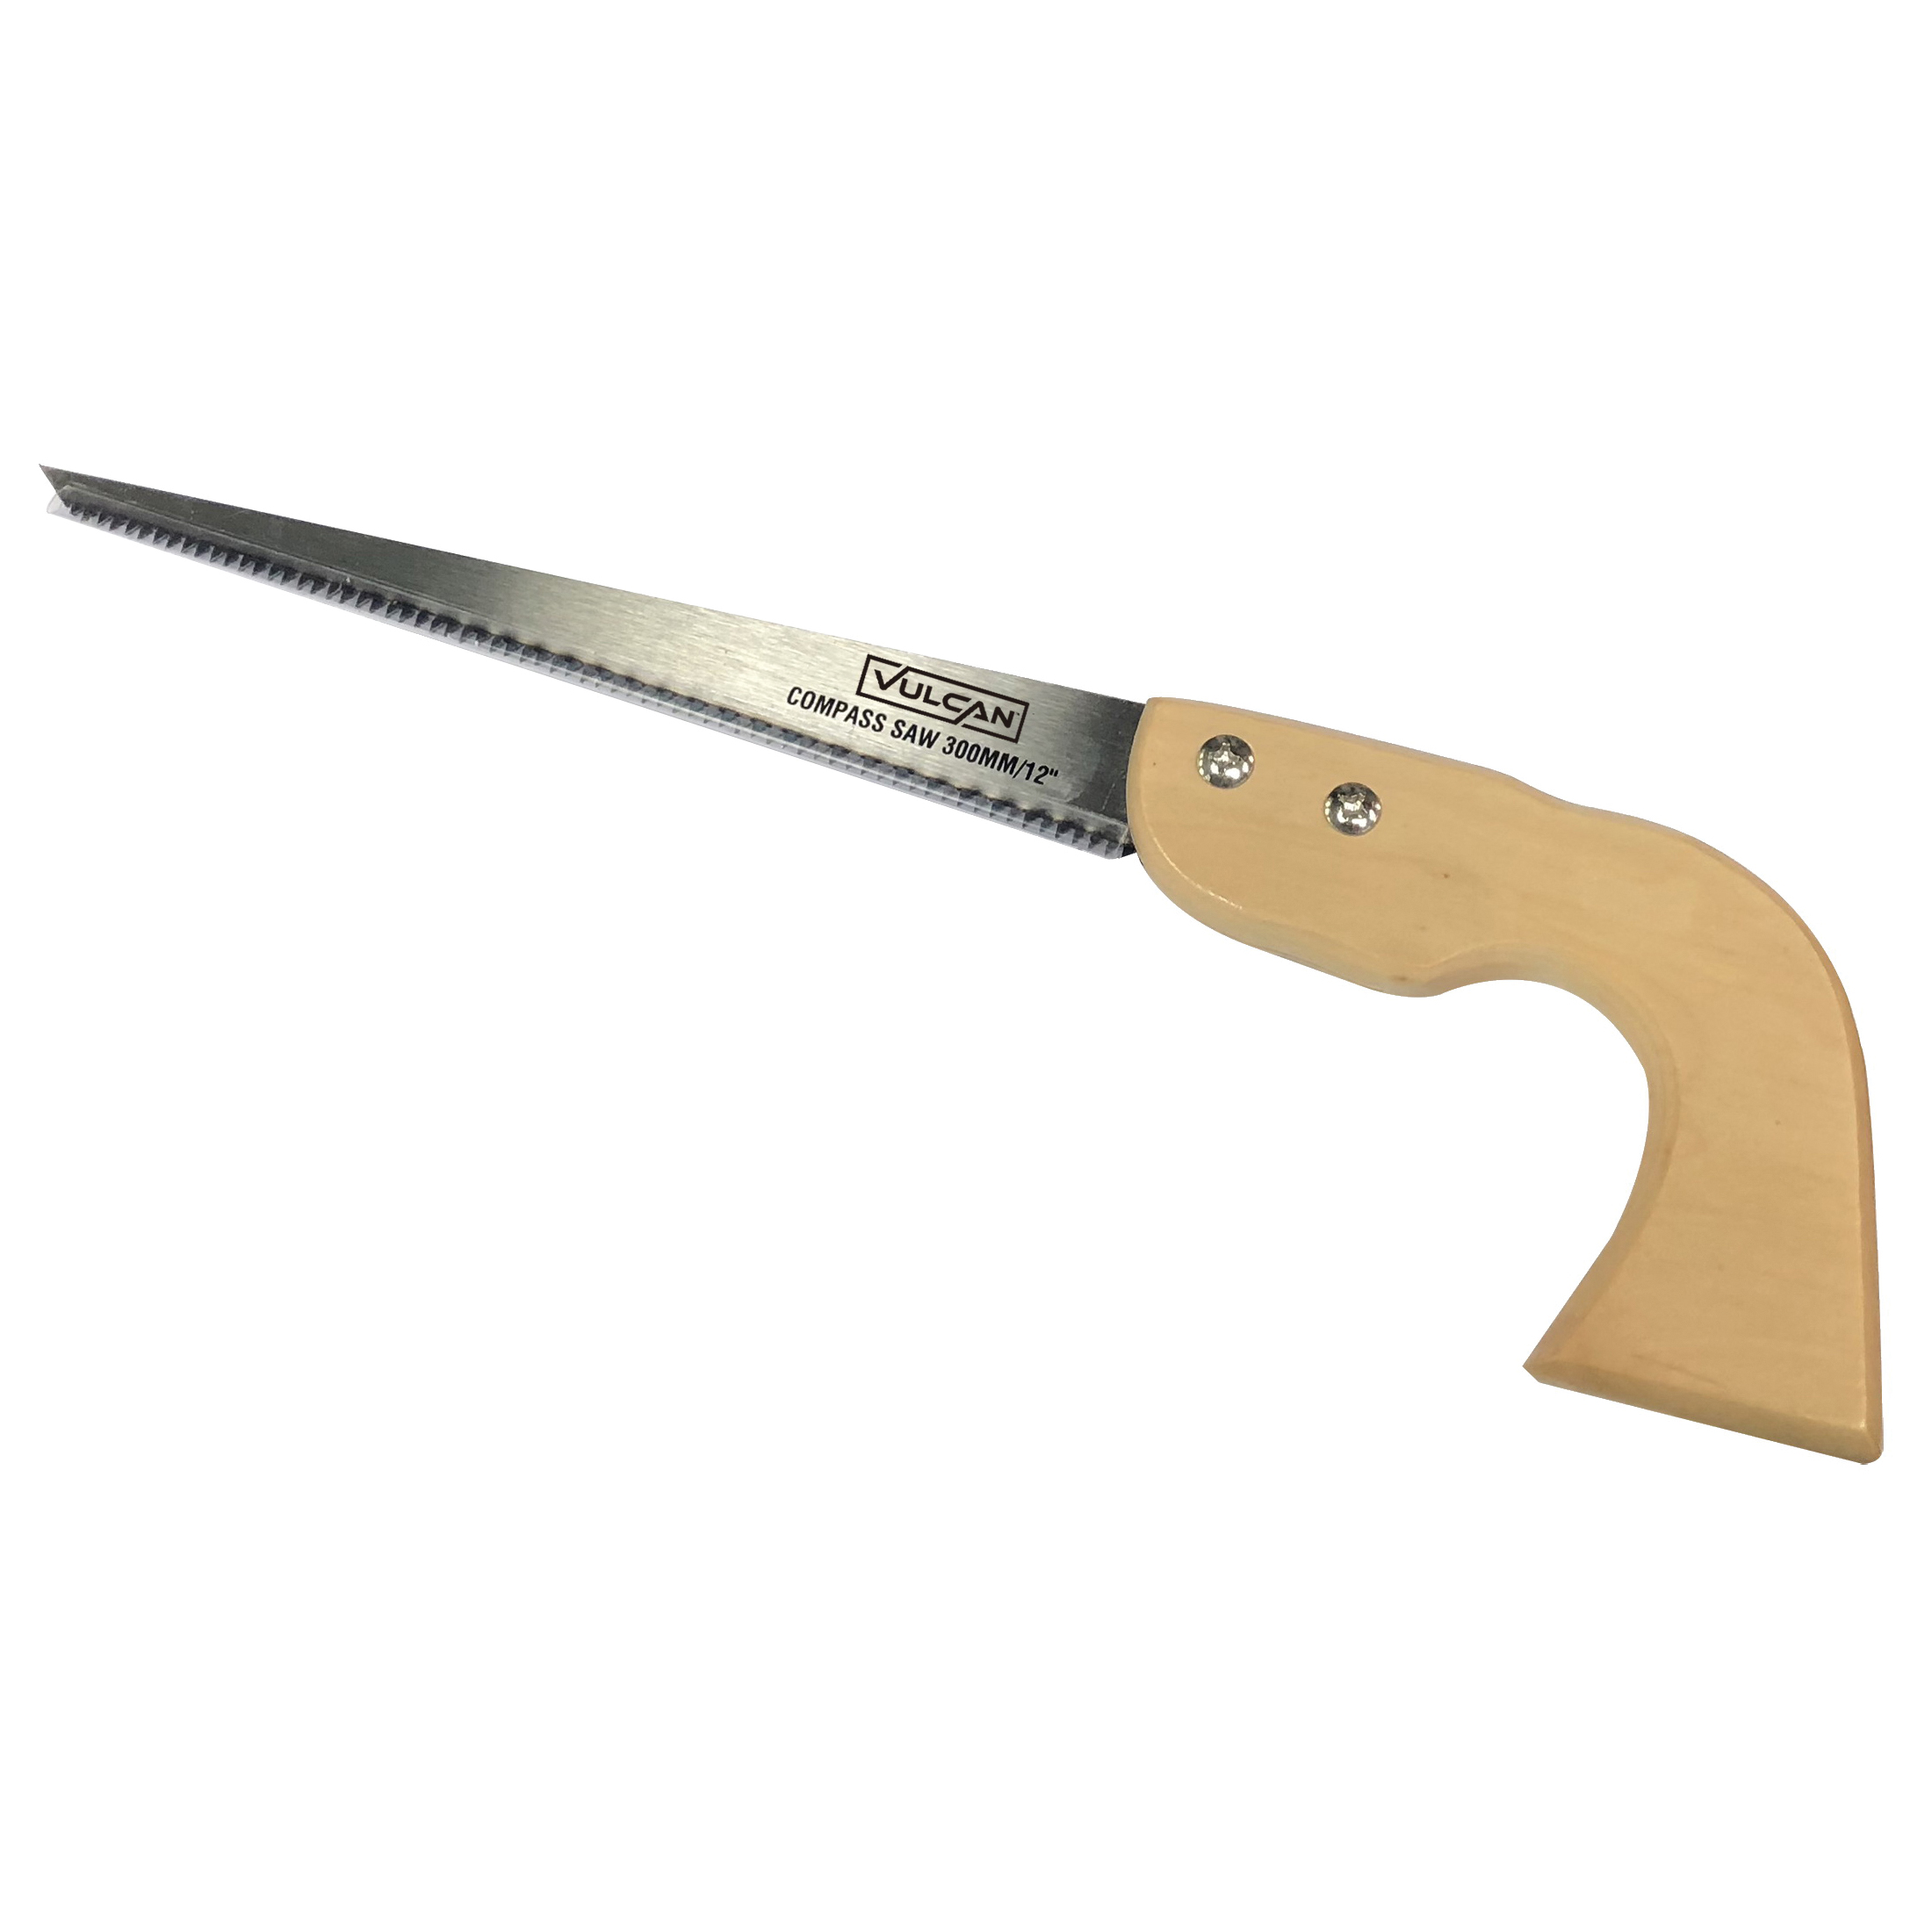 Vulcan Plastic Compass Saw, 12 in L Blade, 1-3/8 in W Blade, 7 TPI, Steel Blade, Plastic Handle - 2